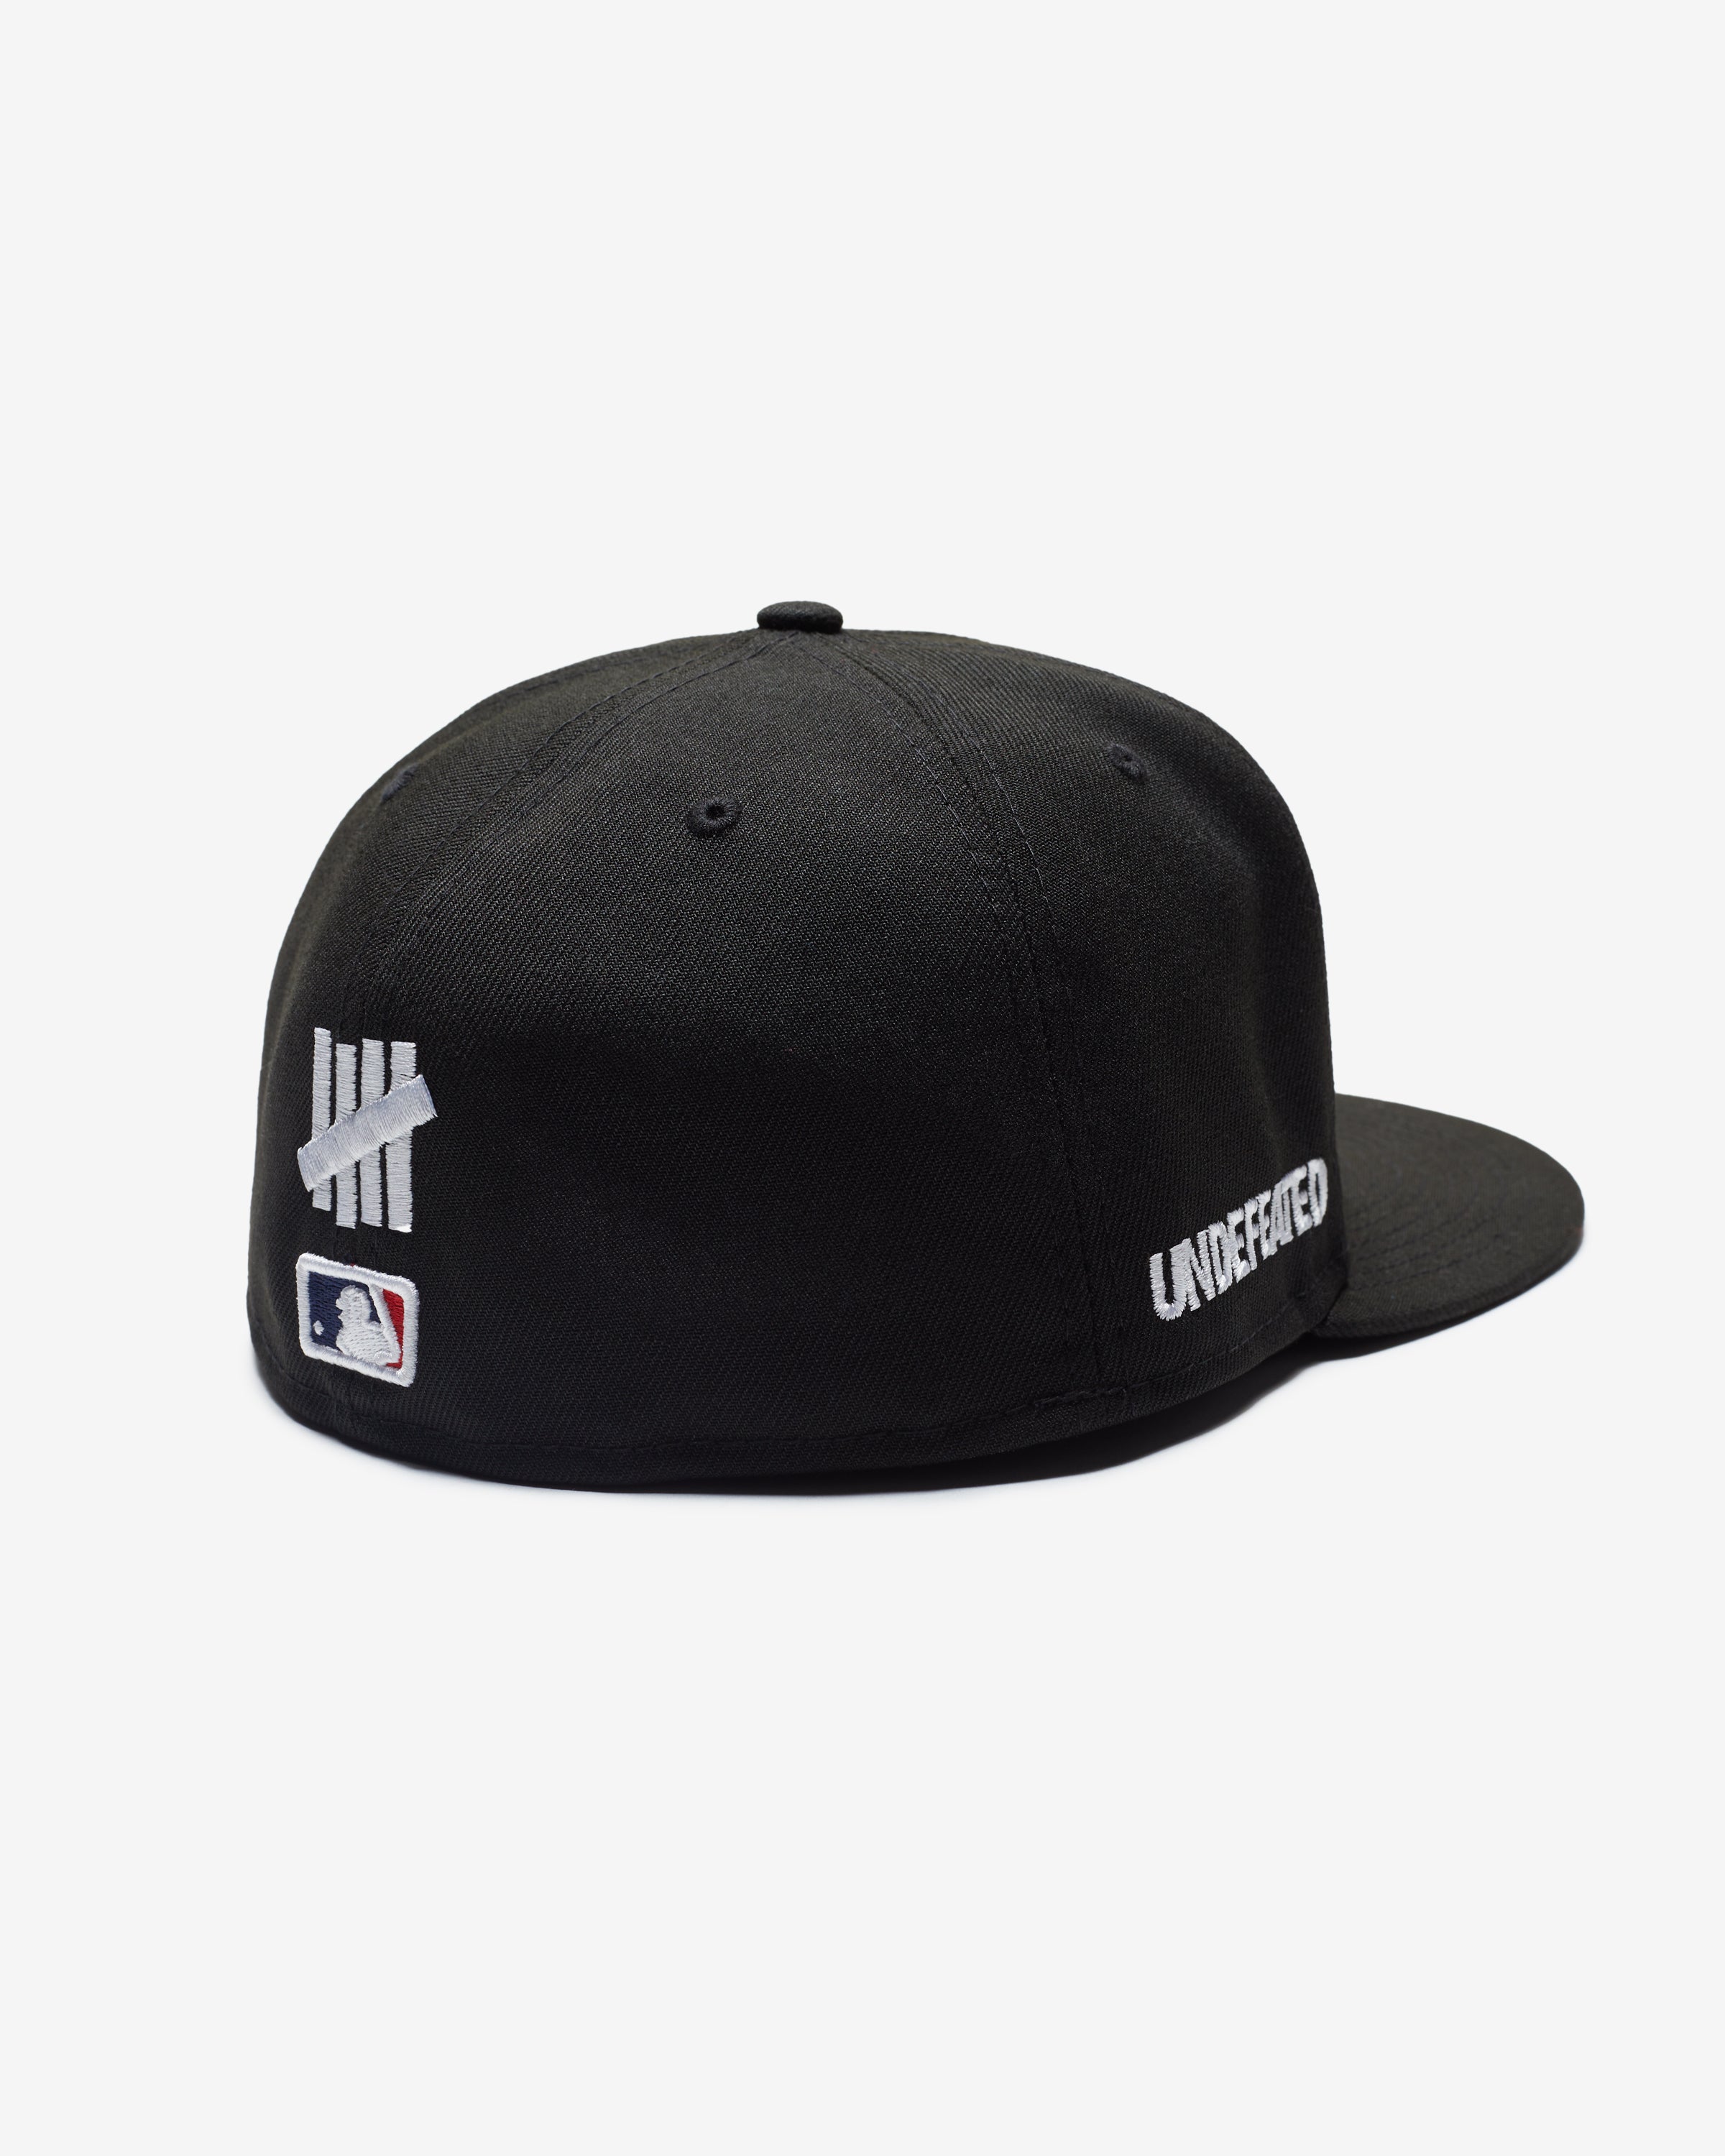 UNDEFEATED X NEW ERA NY YANKEES 59FIFTY FITTED - BLACK – Undefeated